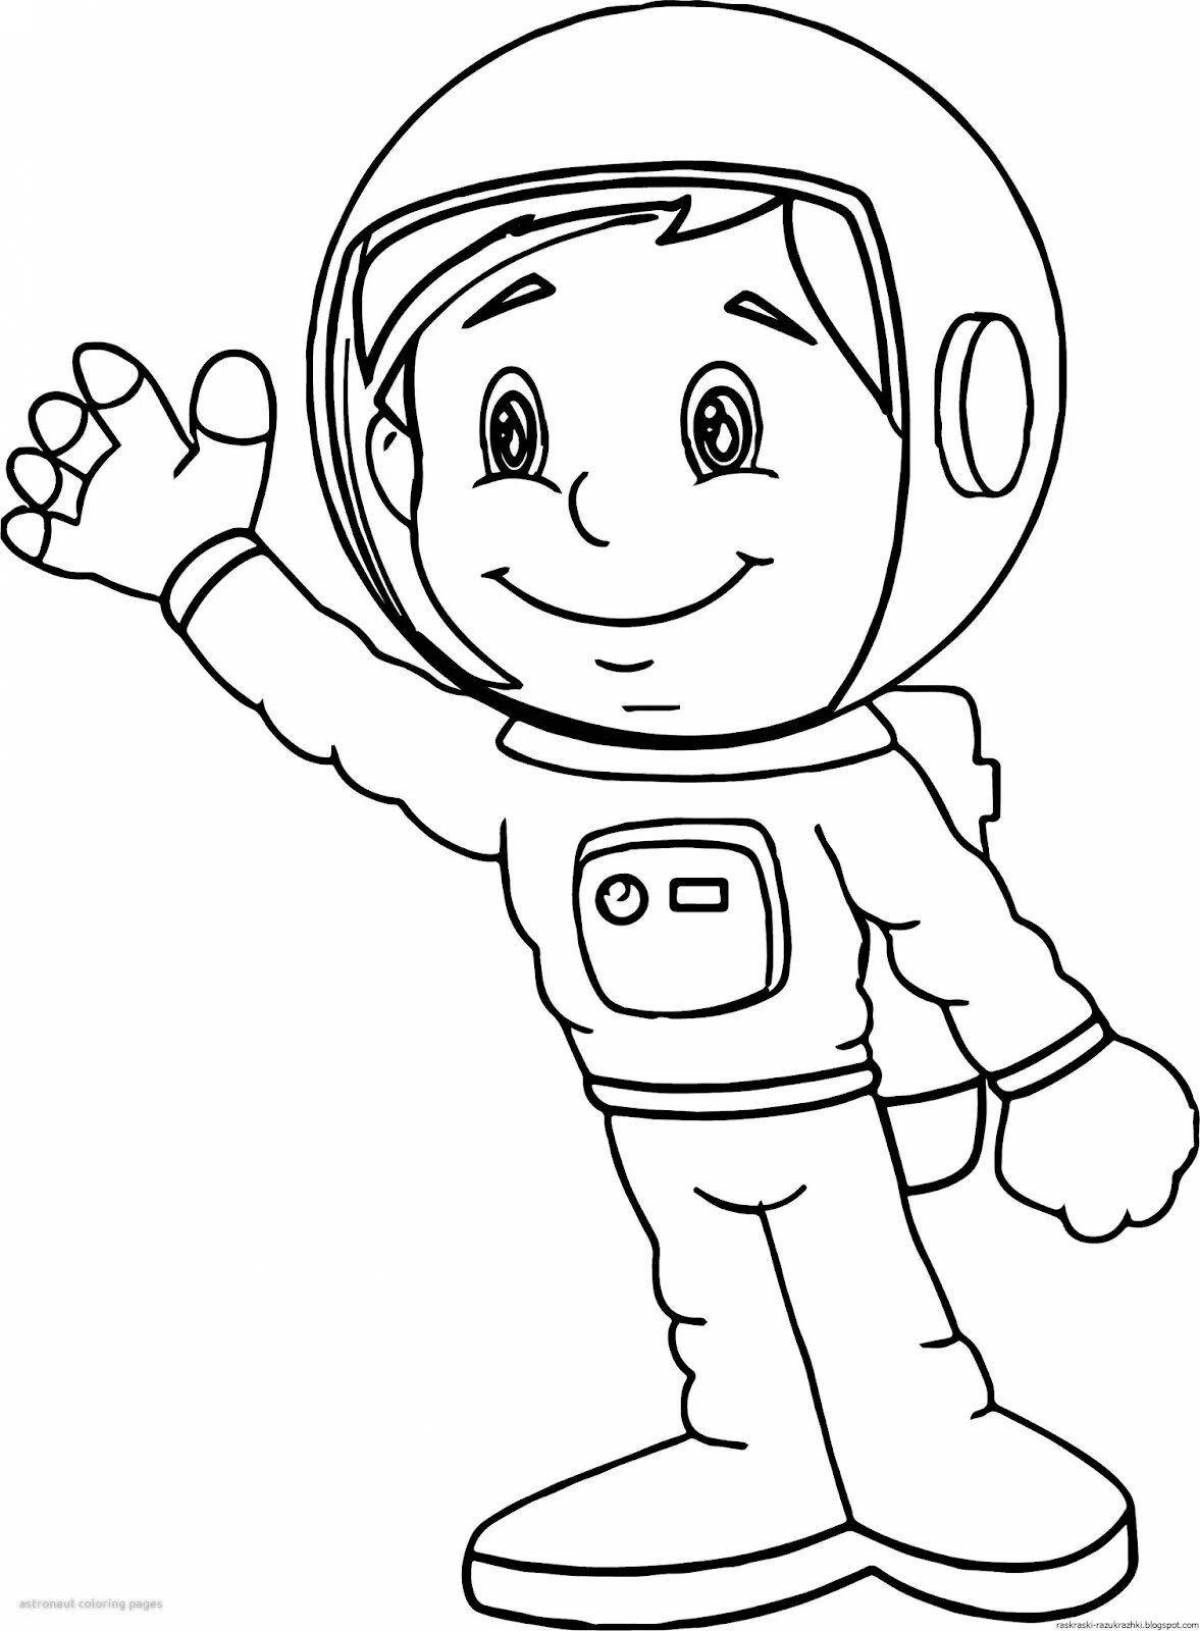 Creative astronaut coloring for kids